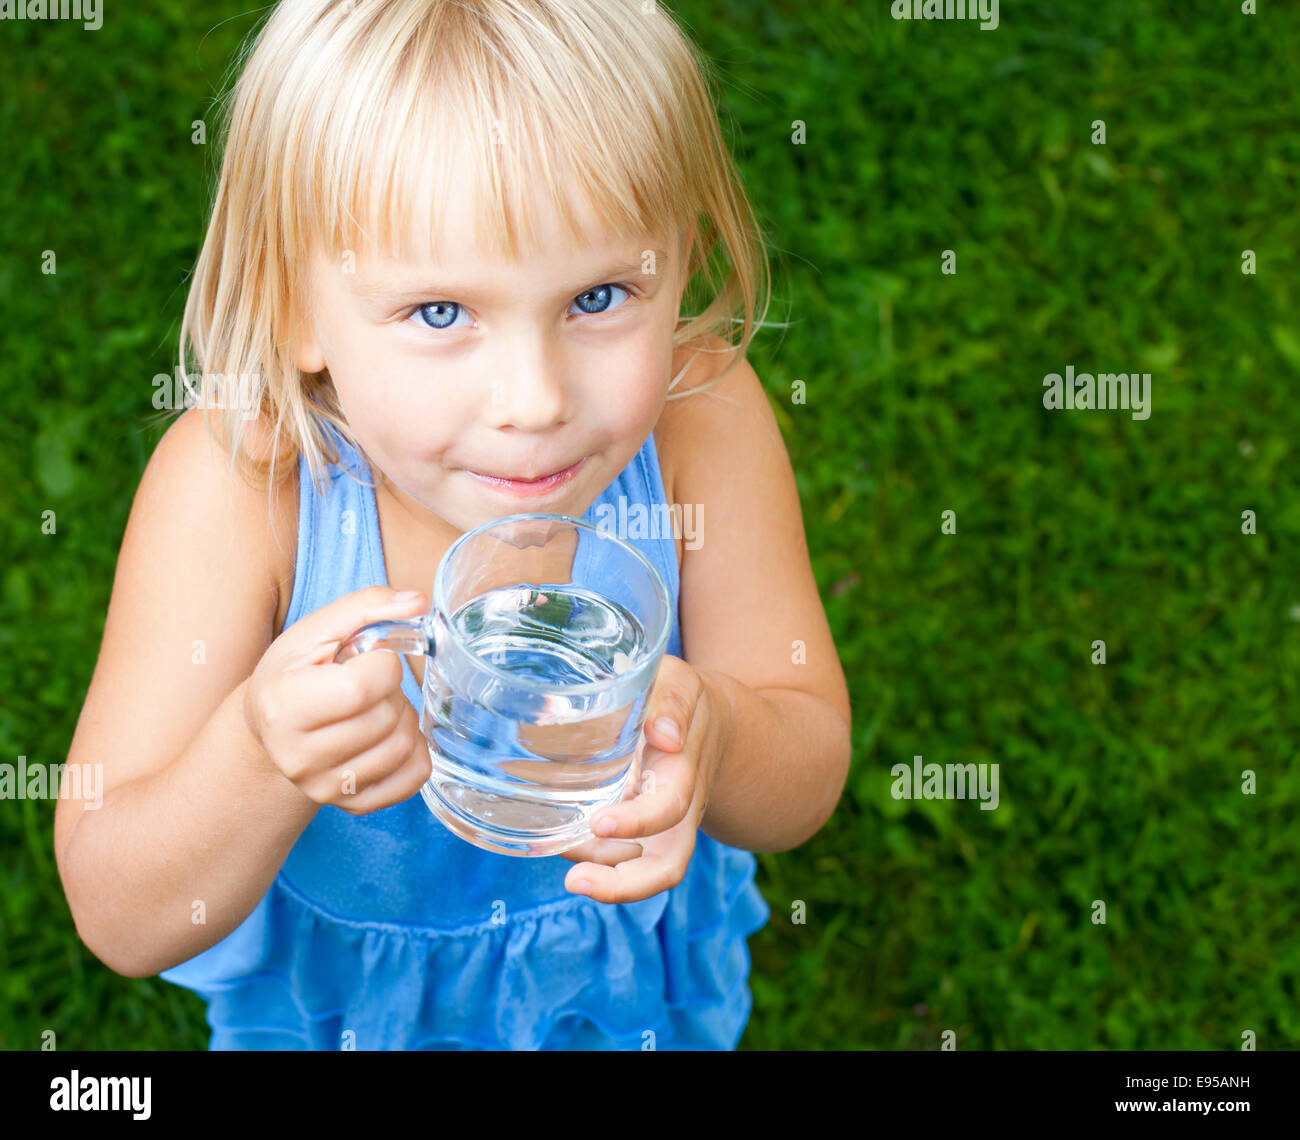 Little girl holding glass of water outdoors Stock Photo - Alamy